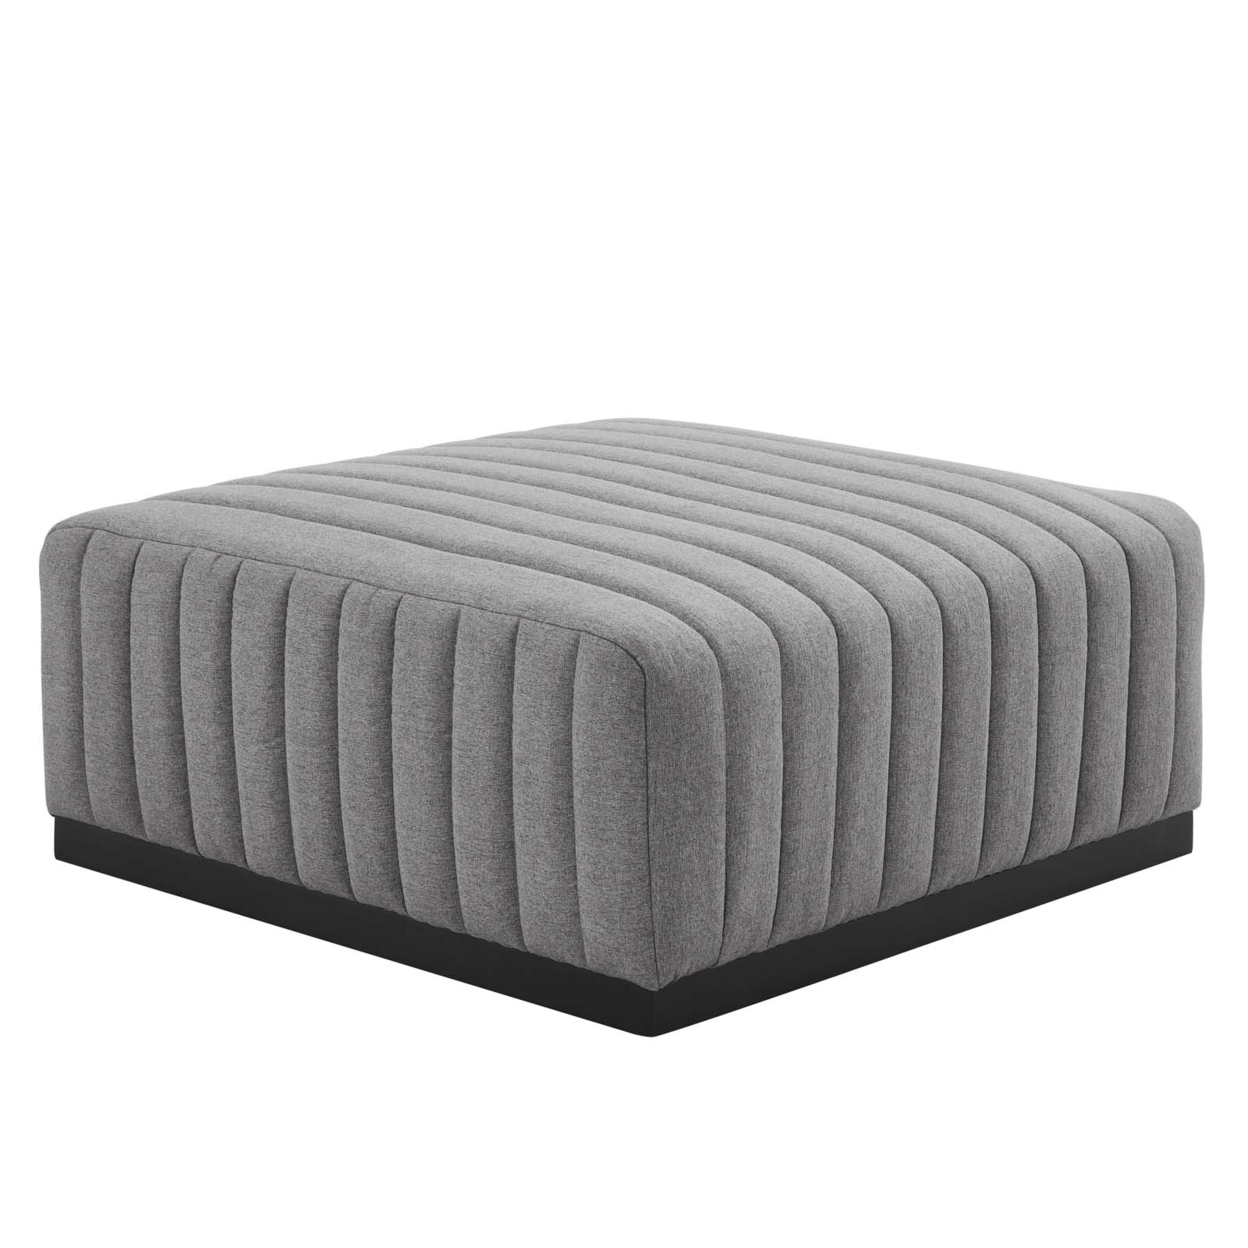 Conjure Channel Tufted Upholstered Fabric Ottoman, Black Light Gray